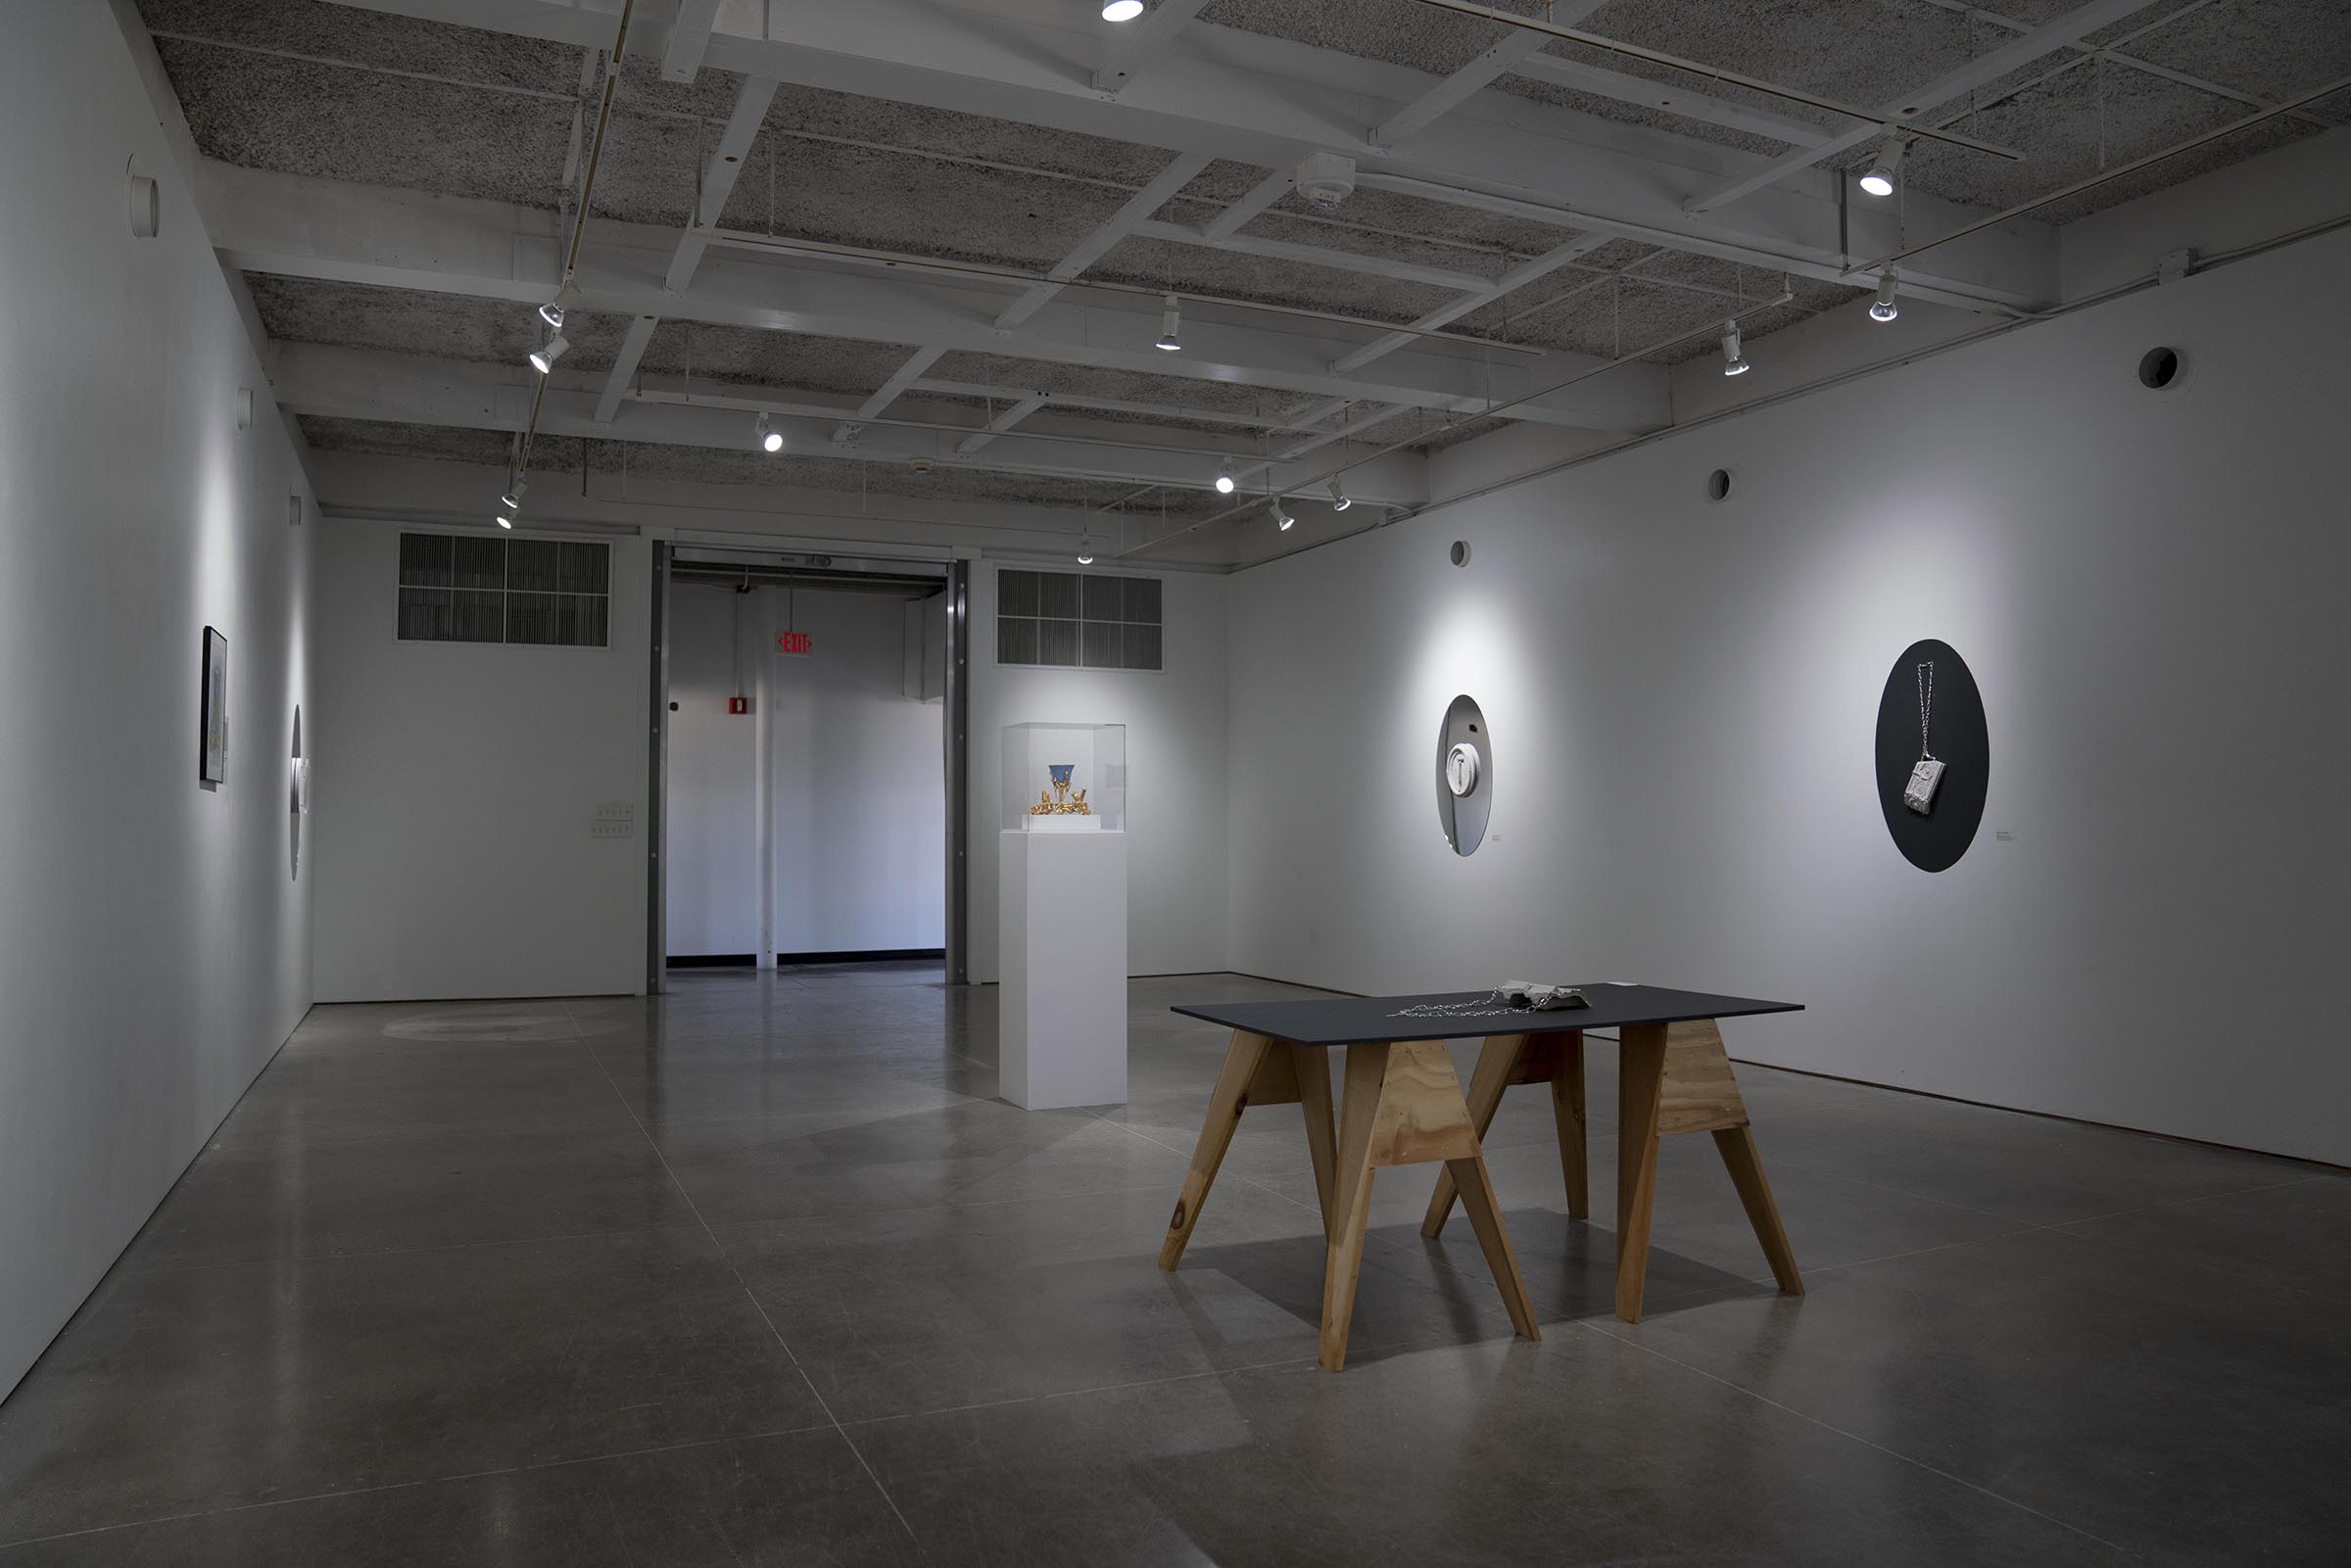 Installation view of 自 𐩑 愈 Self-healing Culture Master of Fine Arts Exhibition by Ziqin (Marsh) Min at Gallery 7, Humanities Building, University of Wisconsin-Madison.